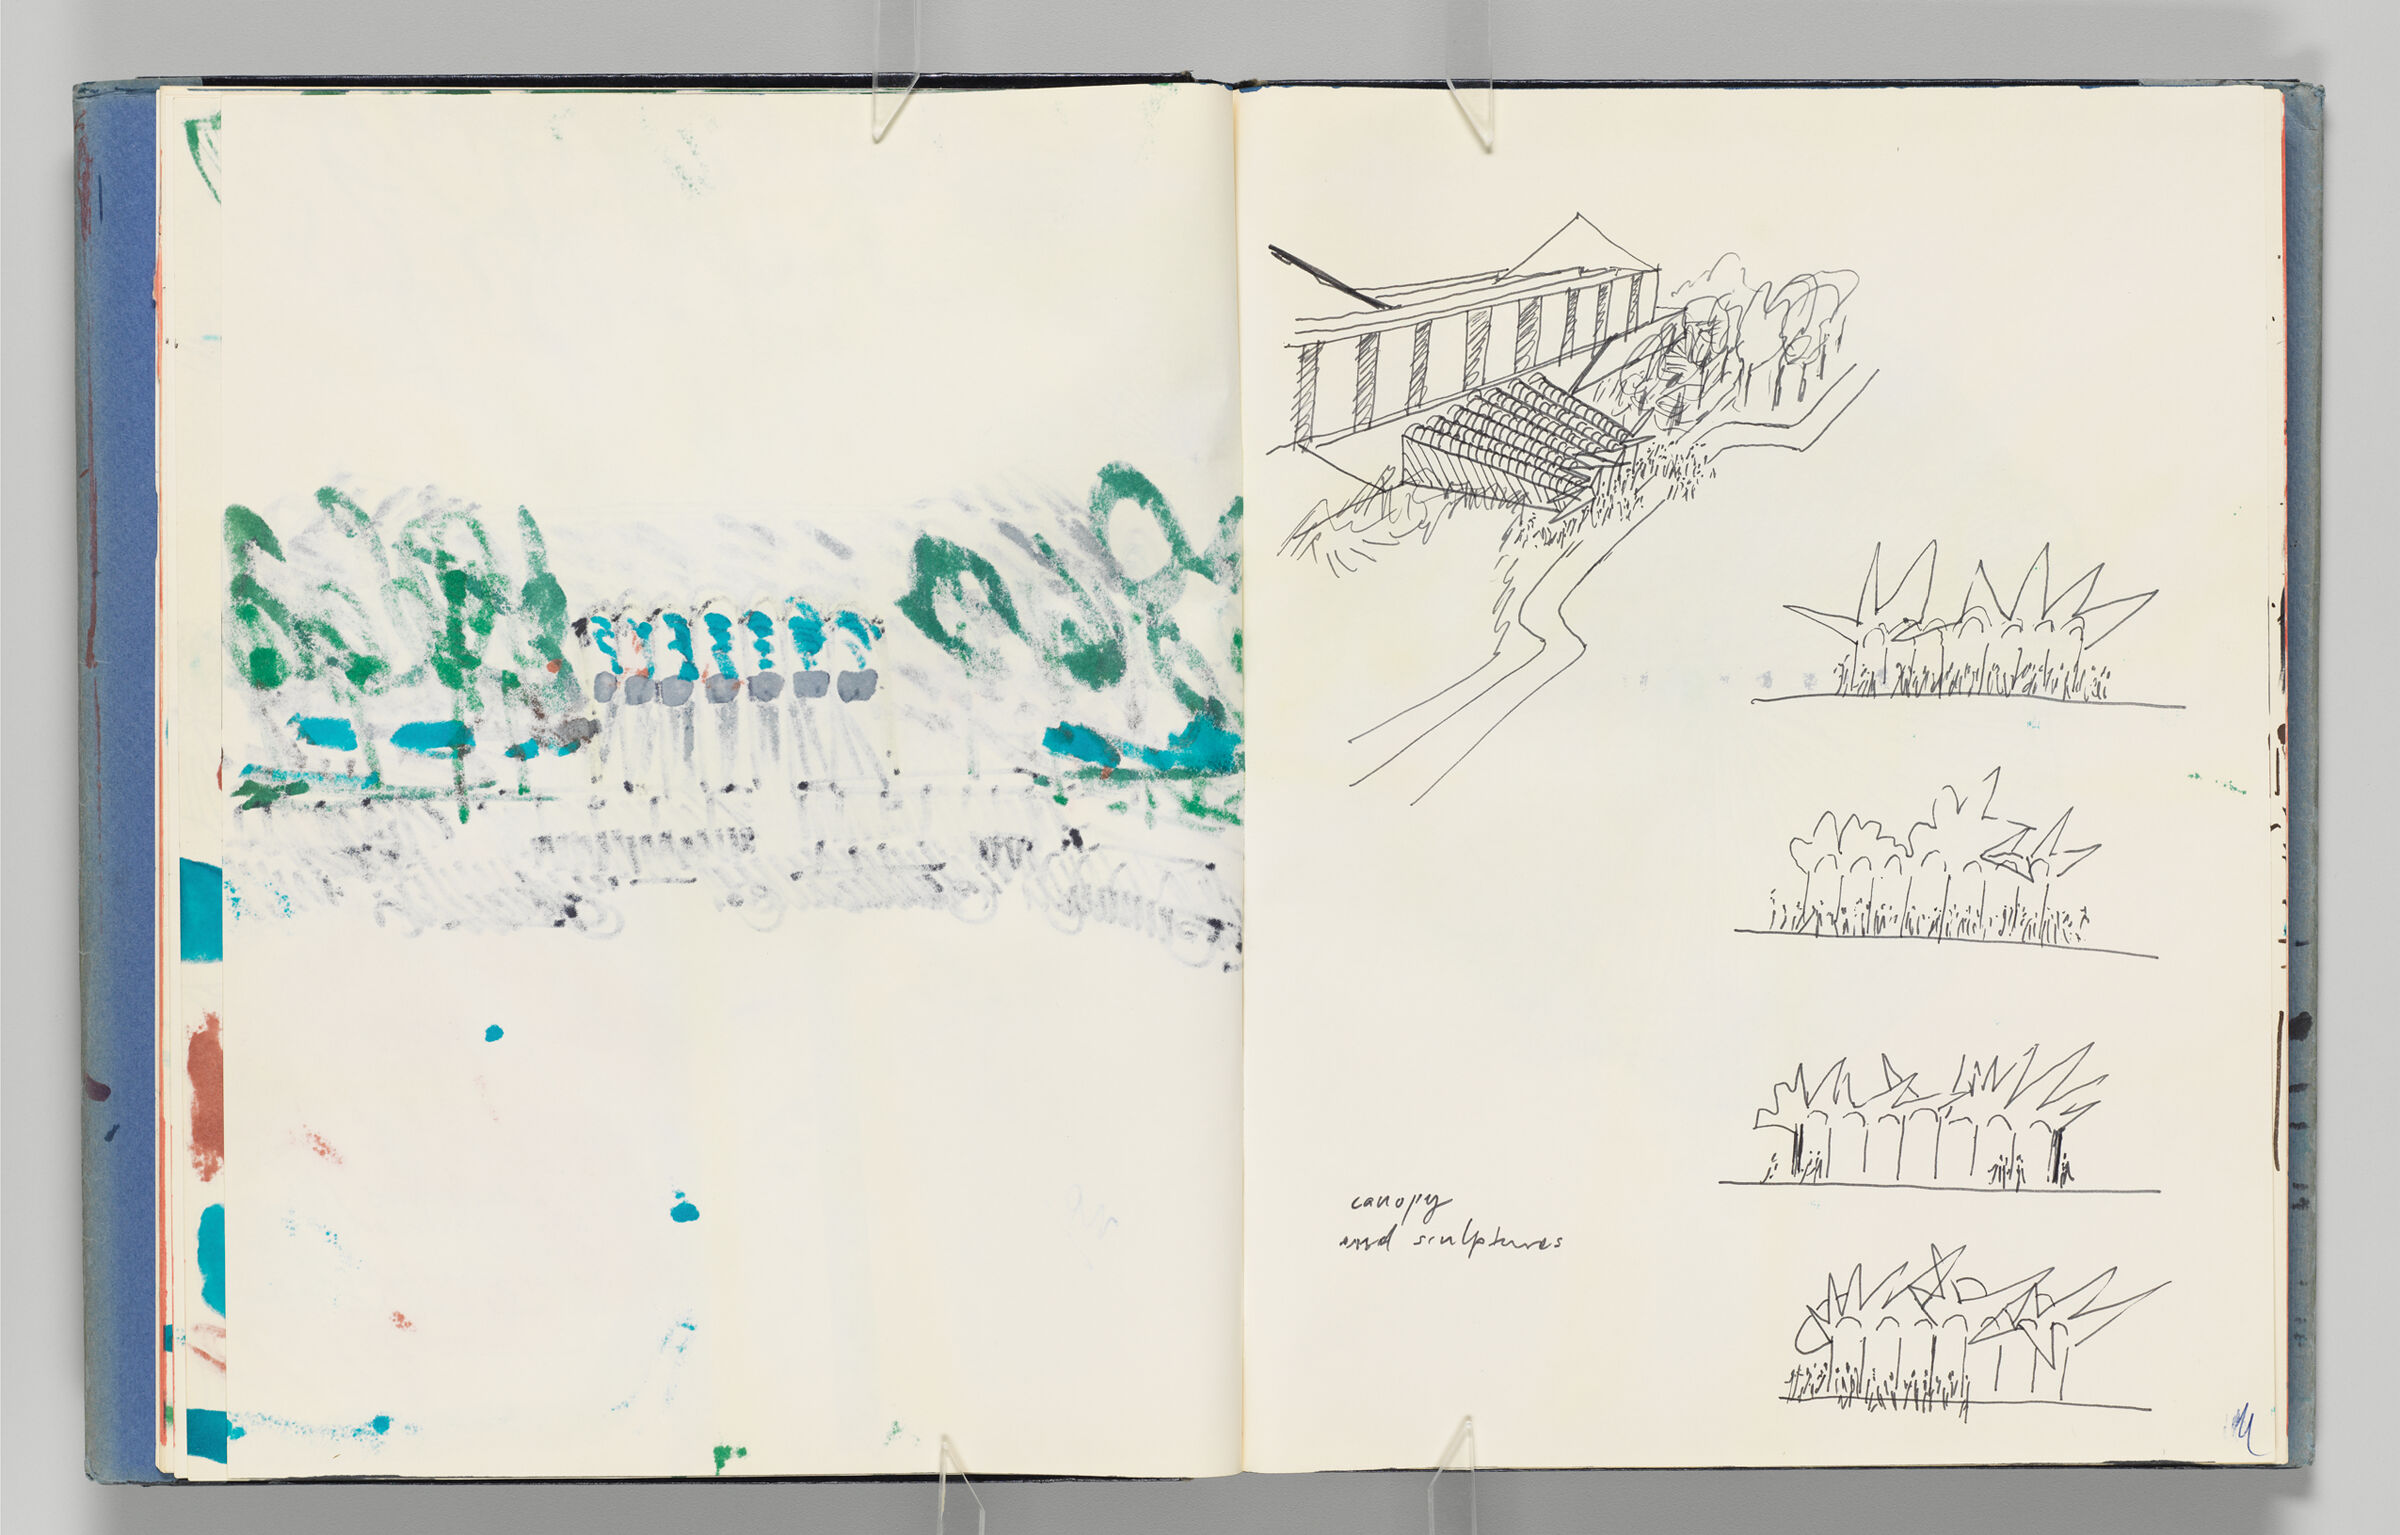 Untitled (Bleed-Through Of Previous Page, Left Page); Untitled (Designs For Museum Of History And Technology In Dc With Notes, Right Page)